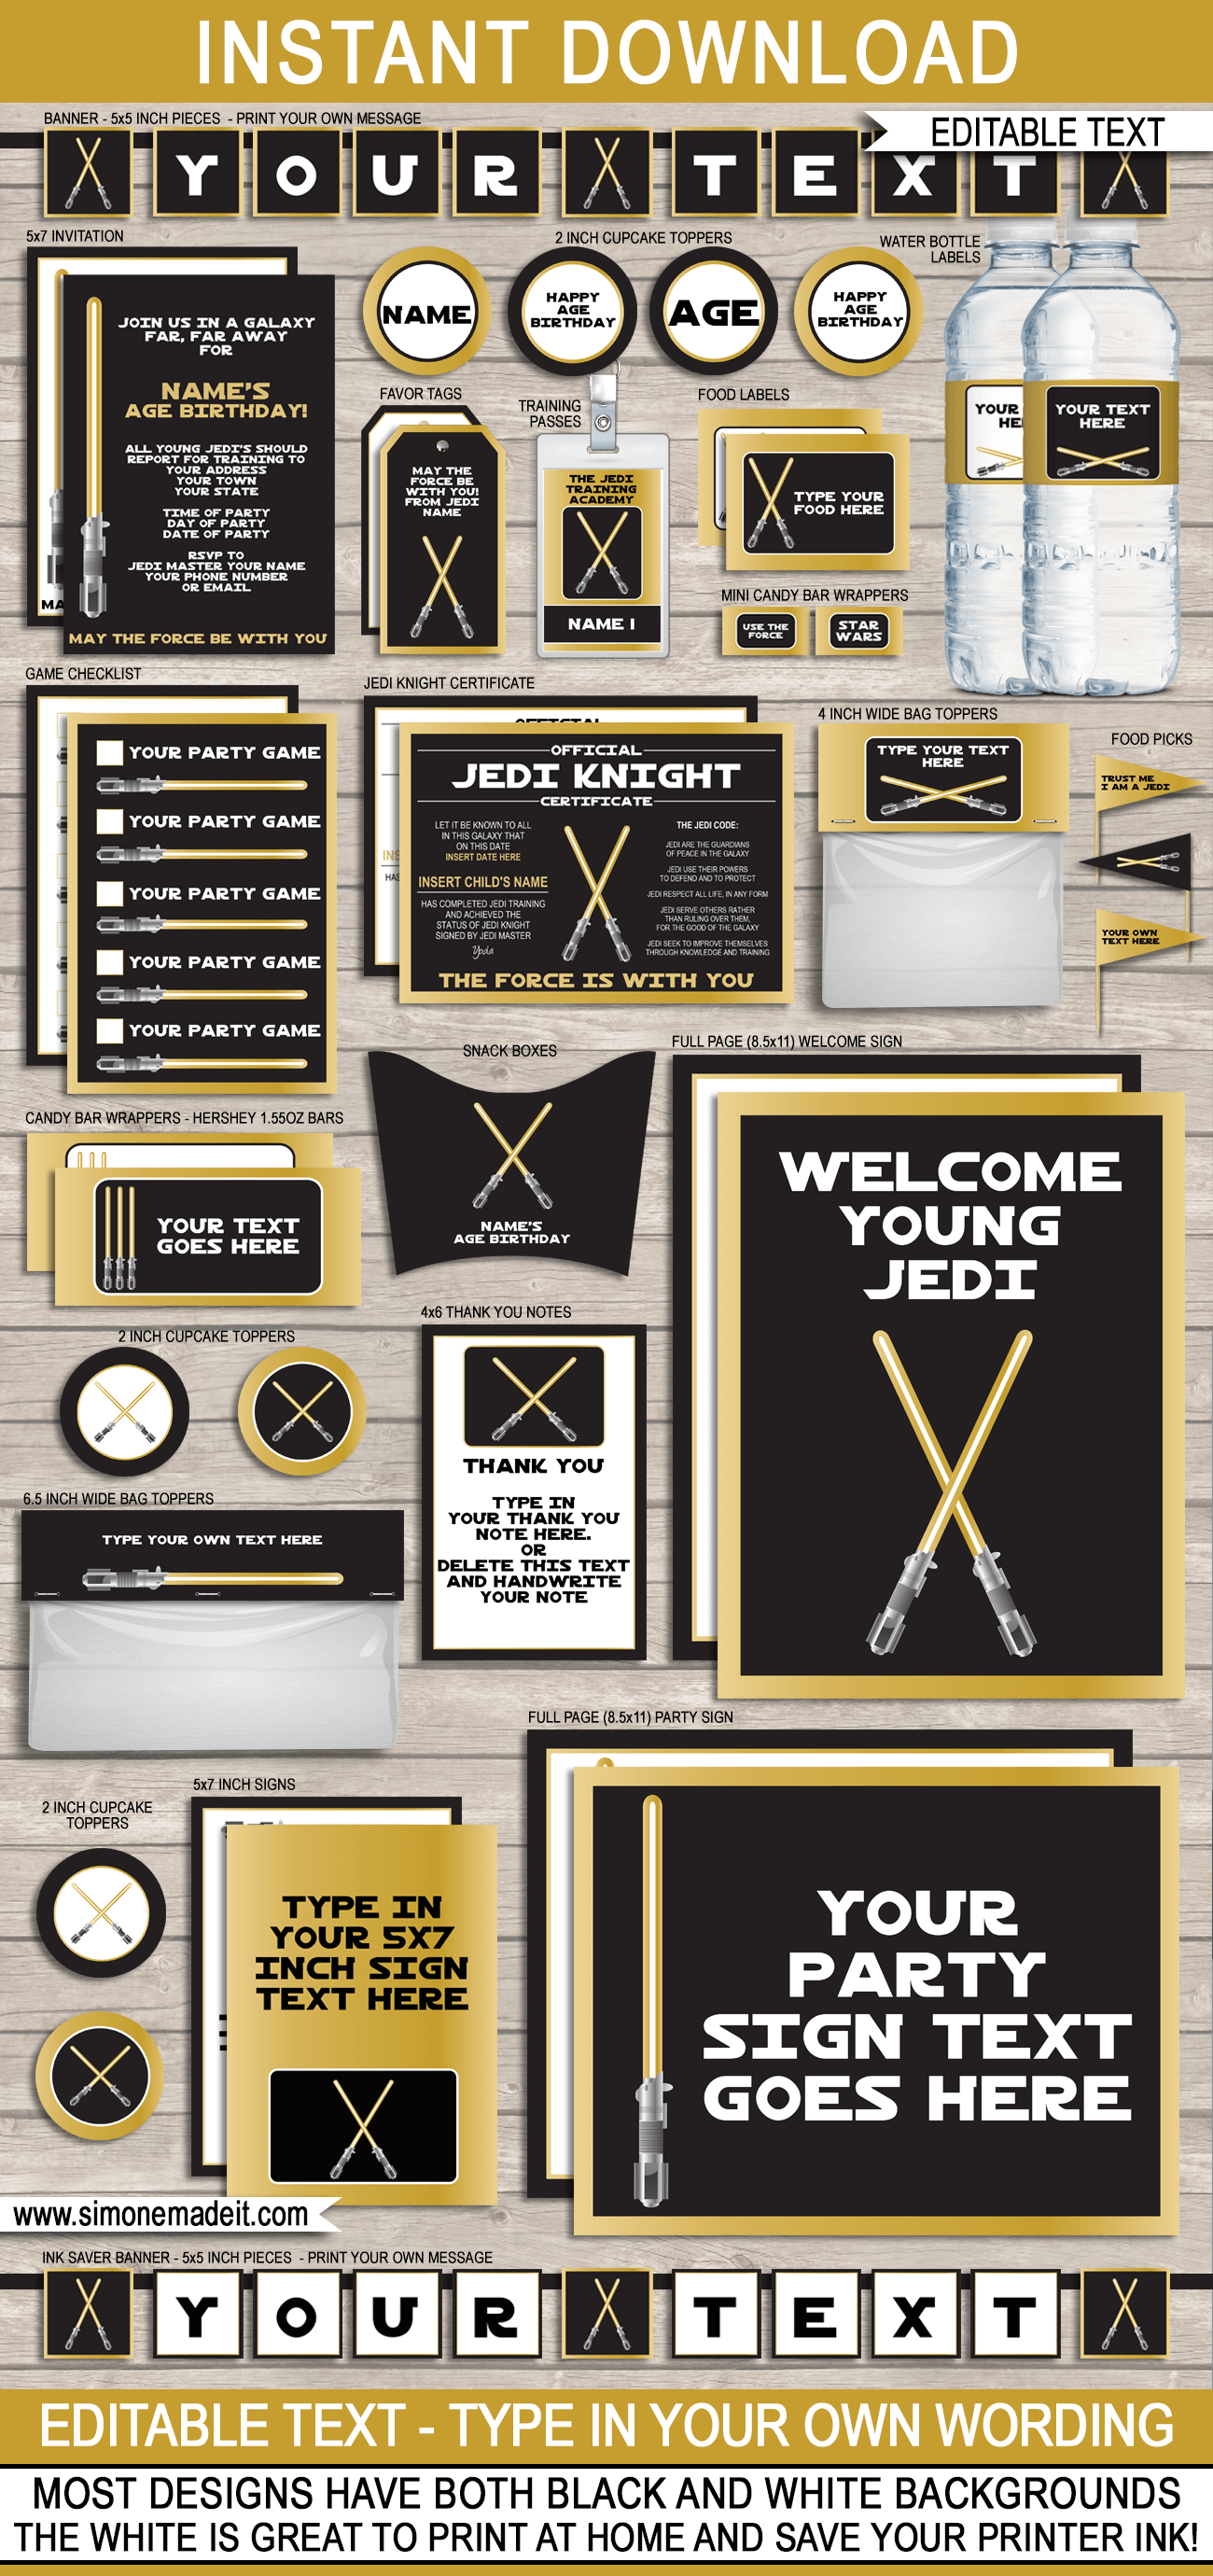 Gold Star Wars Printables, Invitations & Decorations | Editable Birthday Party Theme Templates | Full Package | INSTANT DOWNLOAD $12.50 via SIMONEmadeit.com